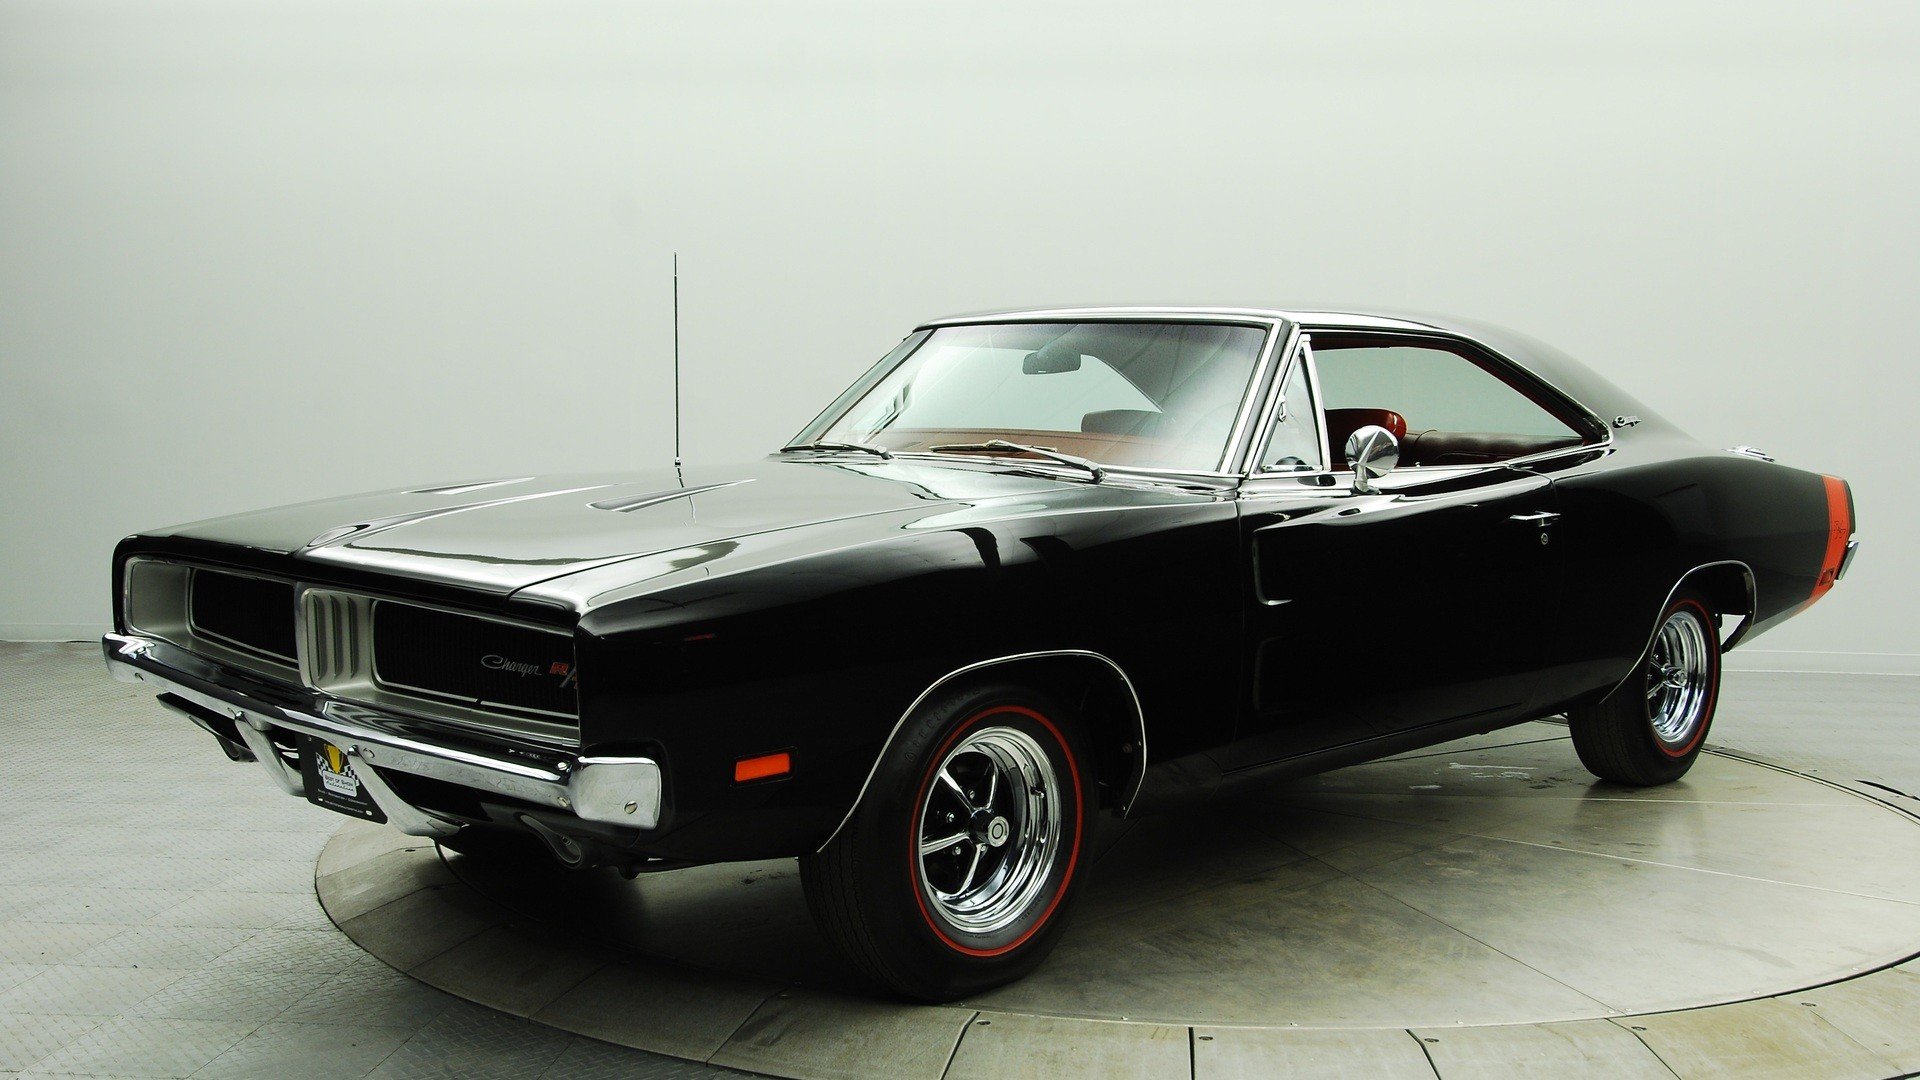 cars, Dodge, Charger, R t, Black, Cars, Classic, Cars, Muscle, Car Wallpaper